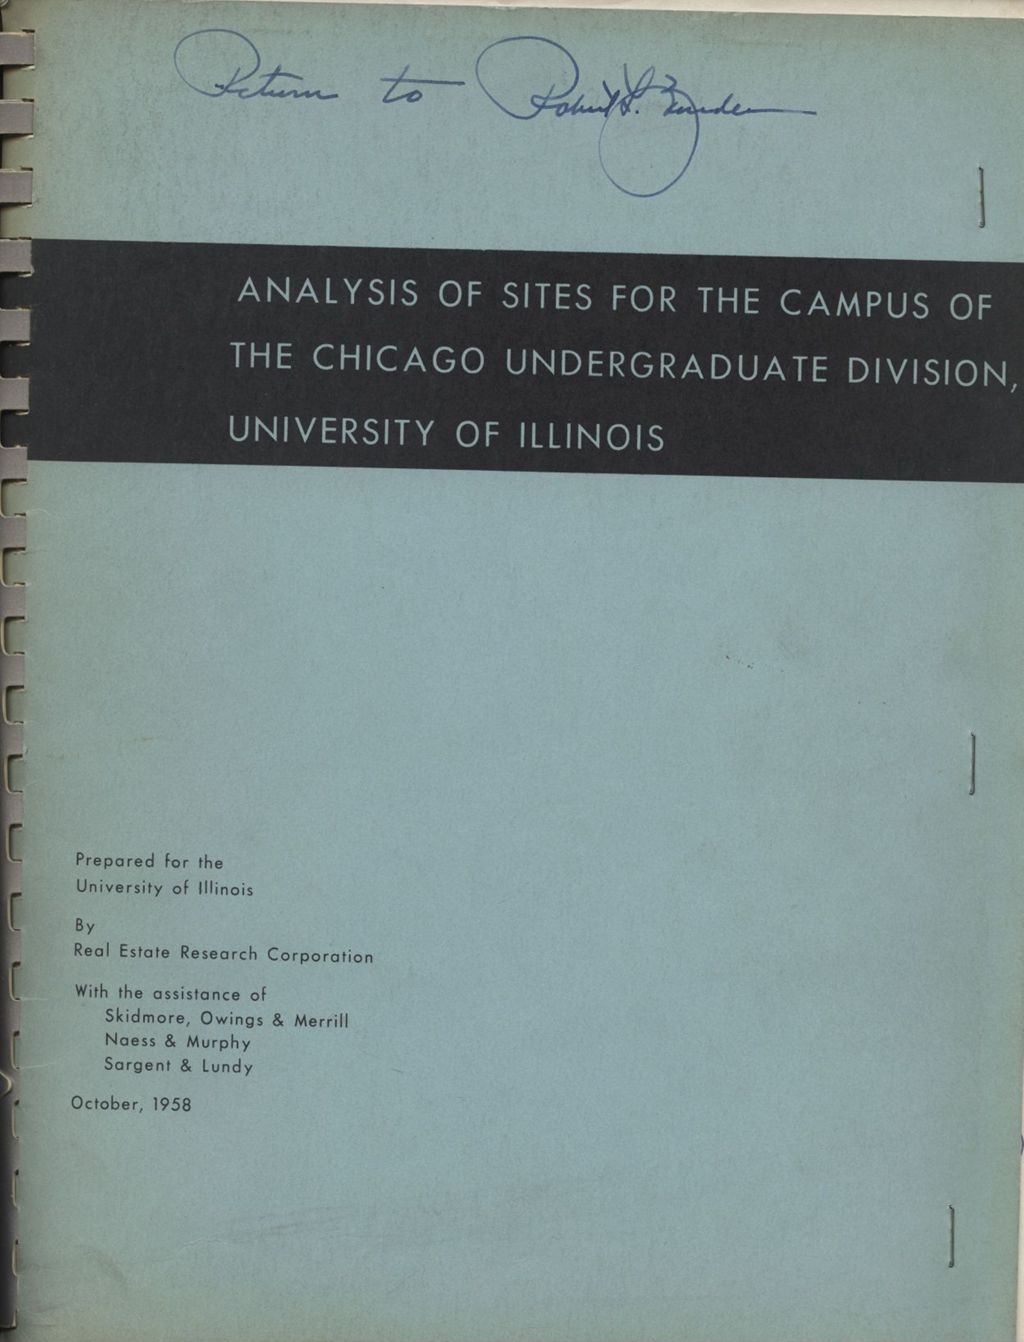 Miniature of Analysis of Sites for the Campus of the Chicago Undergraduate Division, University of Illinois